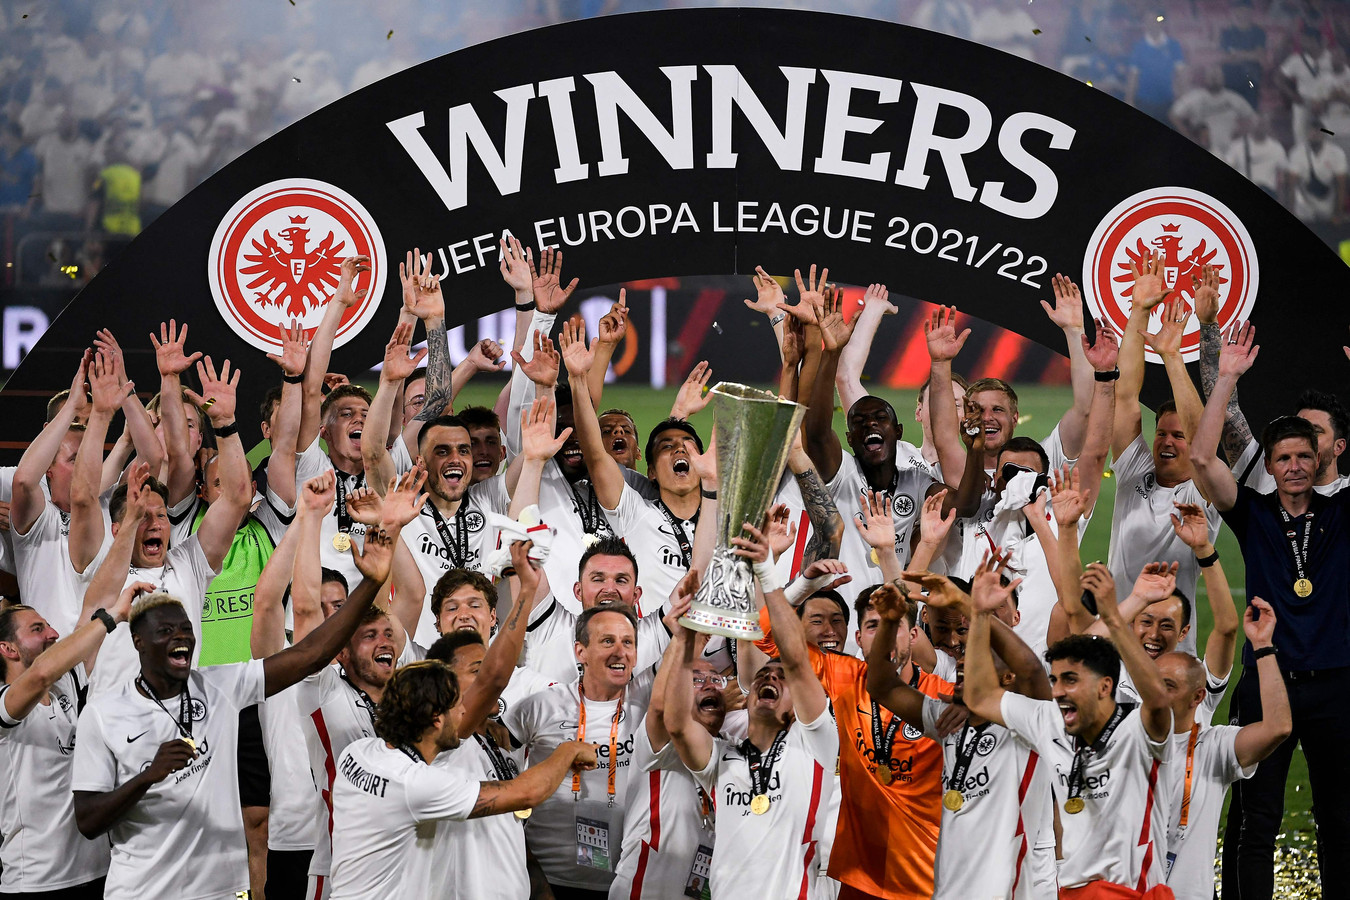 TOPSHOT - Eintracht Frankfurt's players celebrate with the trophy after winning the UEFA Europa League final football match between Eintracht Frankfurt and Glasgow Rangers at the Ramon Sanchez Pizjuan stadium in Seville on May 18, 2022. (Photo by JORGE GUERRERO / AFP)